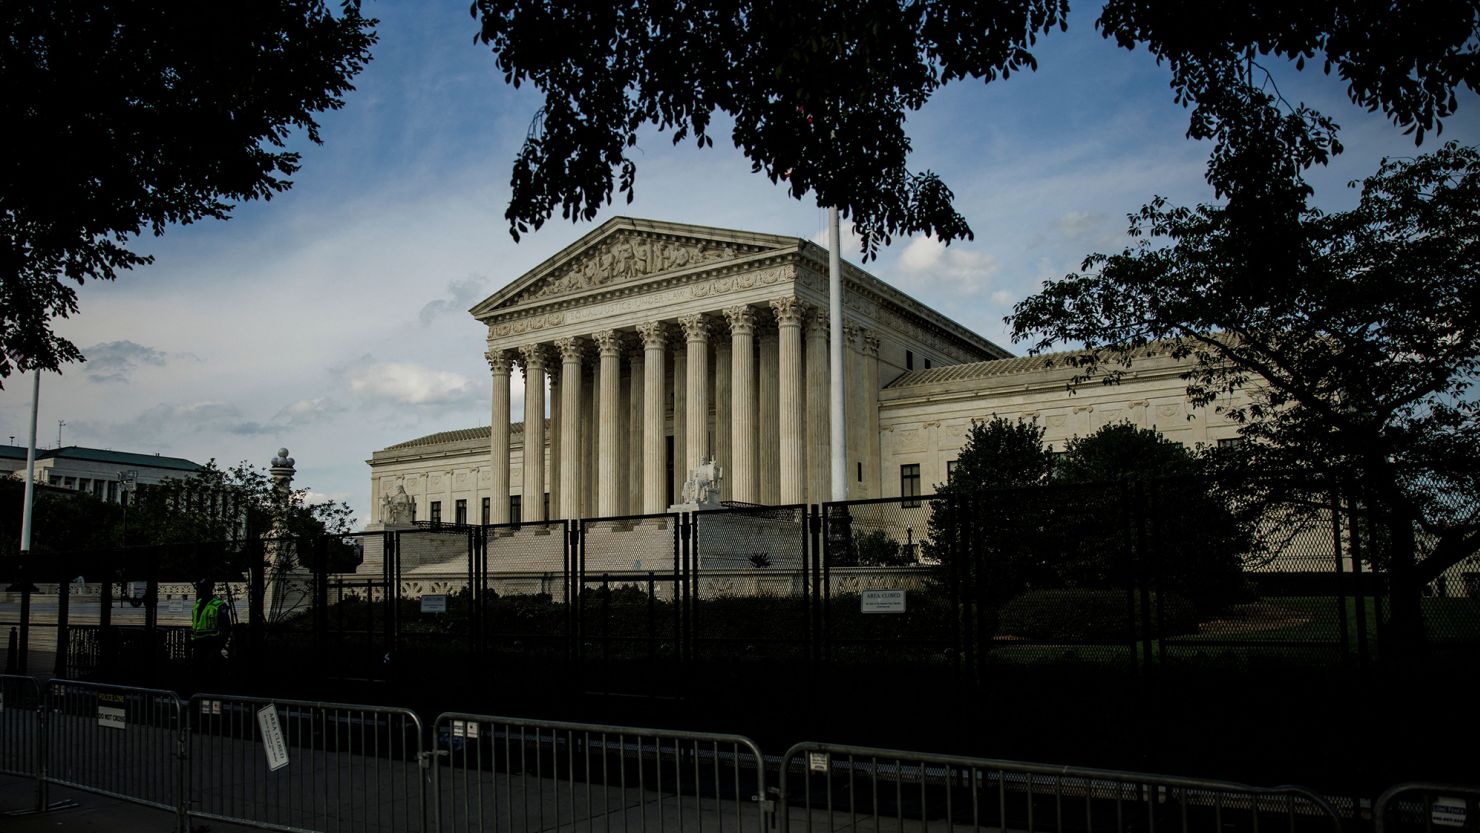 The US Supreme Court is seen in Washington, DC, on June 26, 2022.